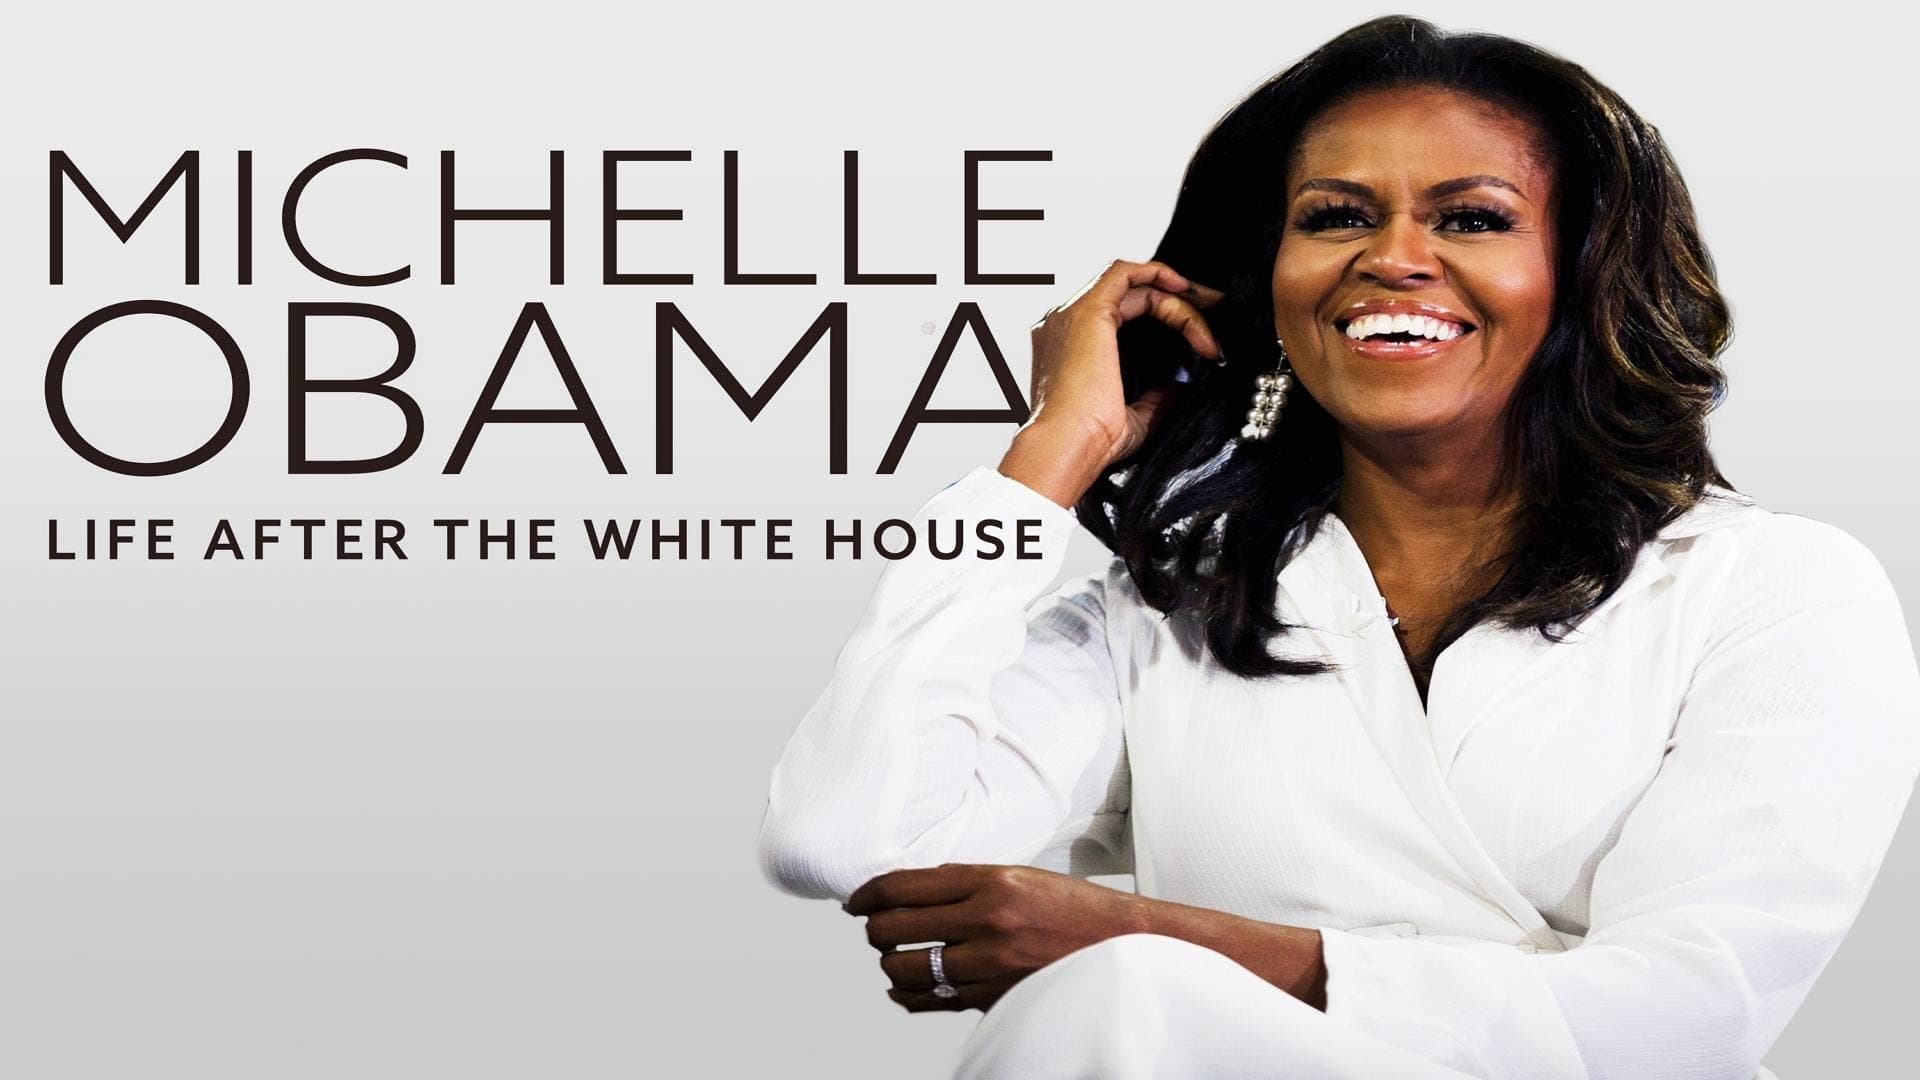 Michelle Obama: Life After the White House (2020)